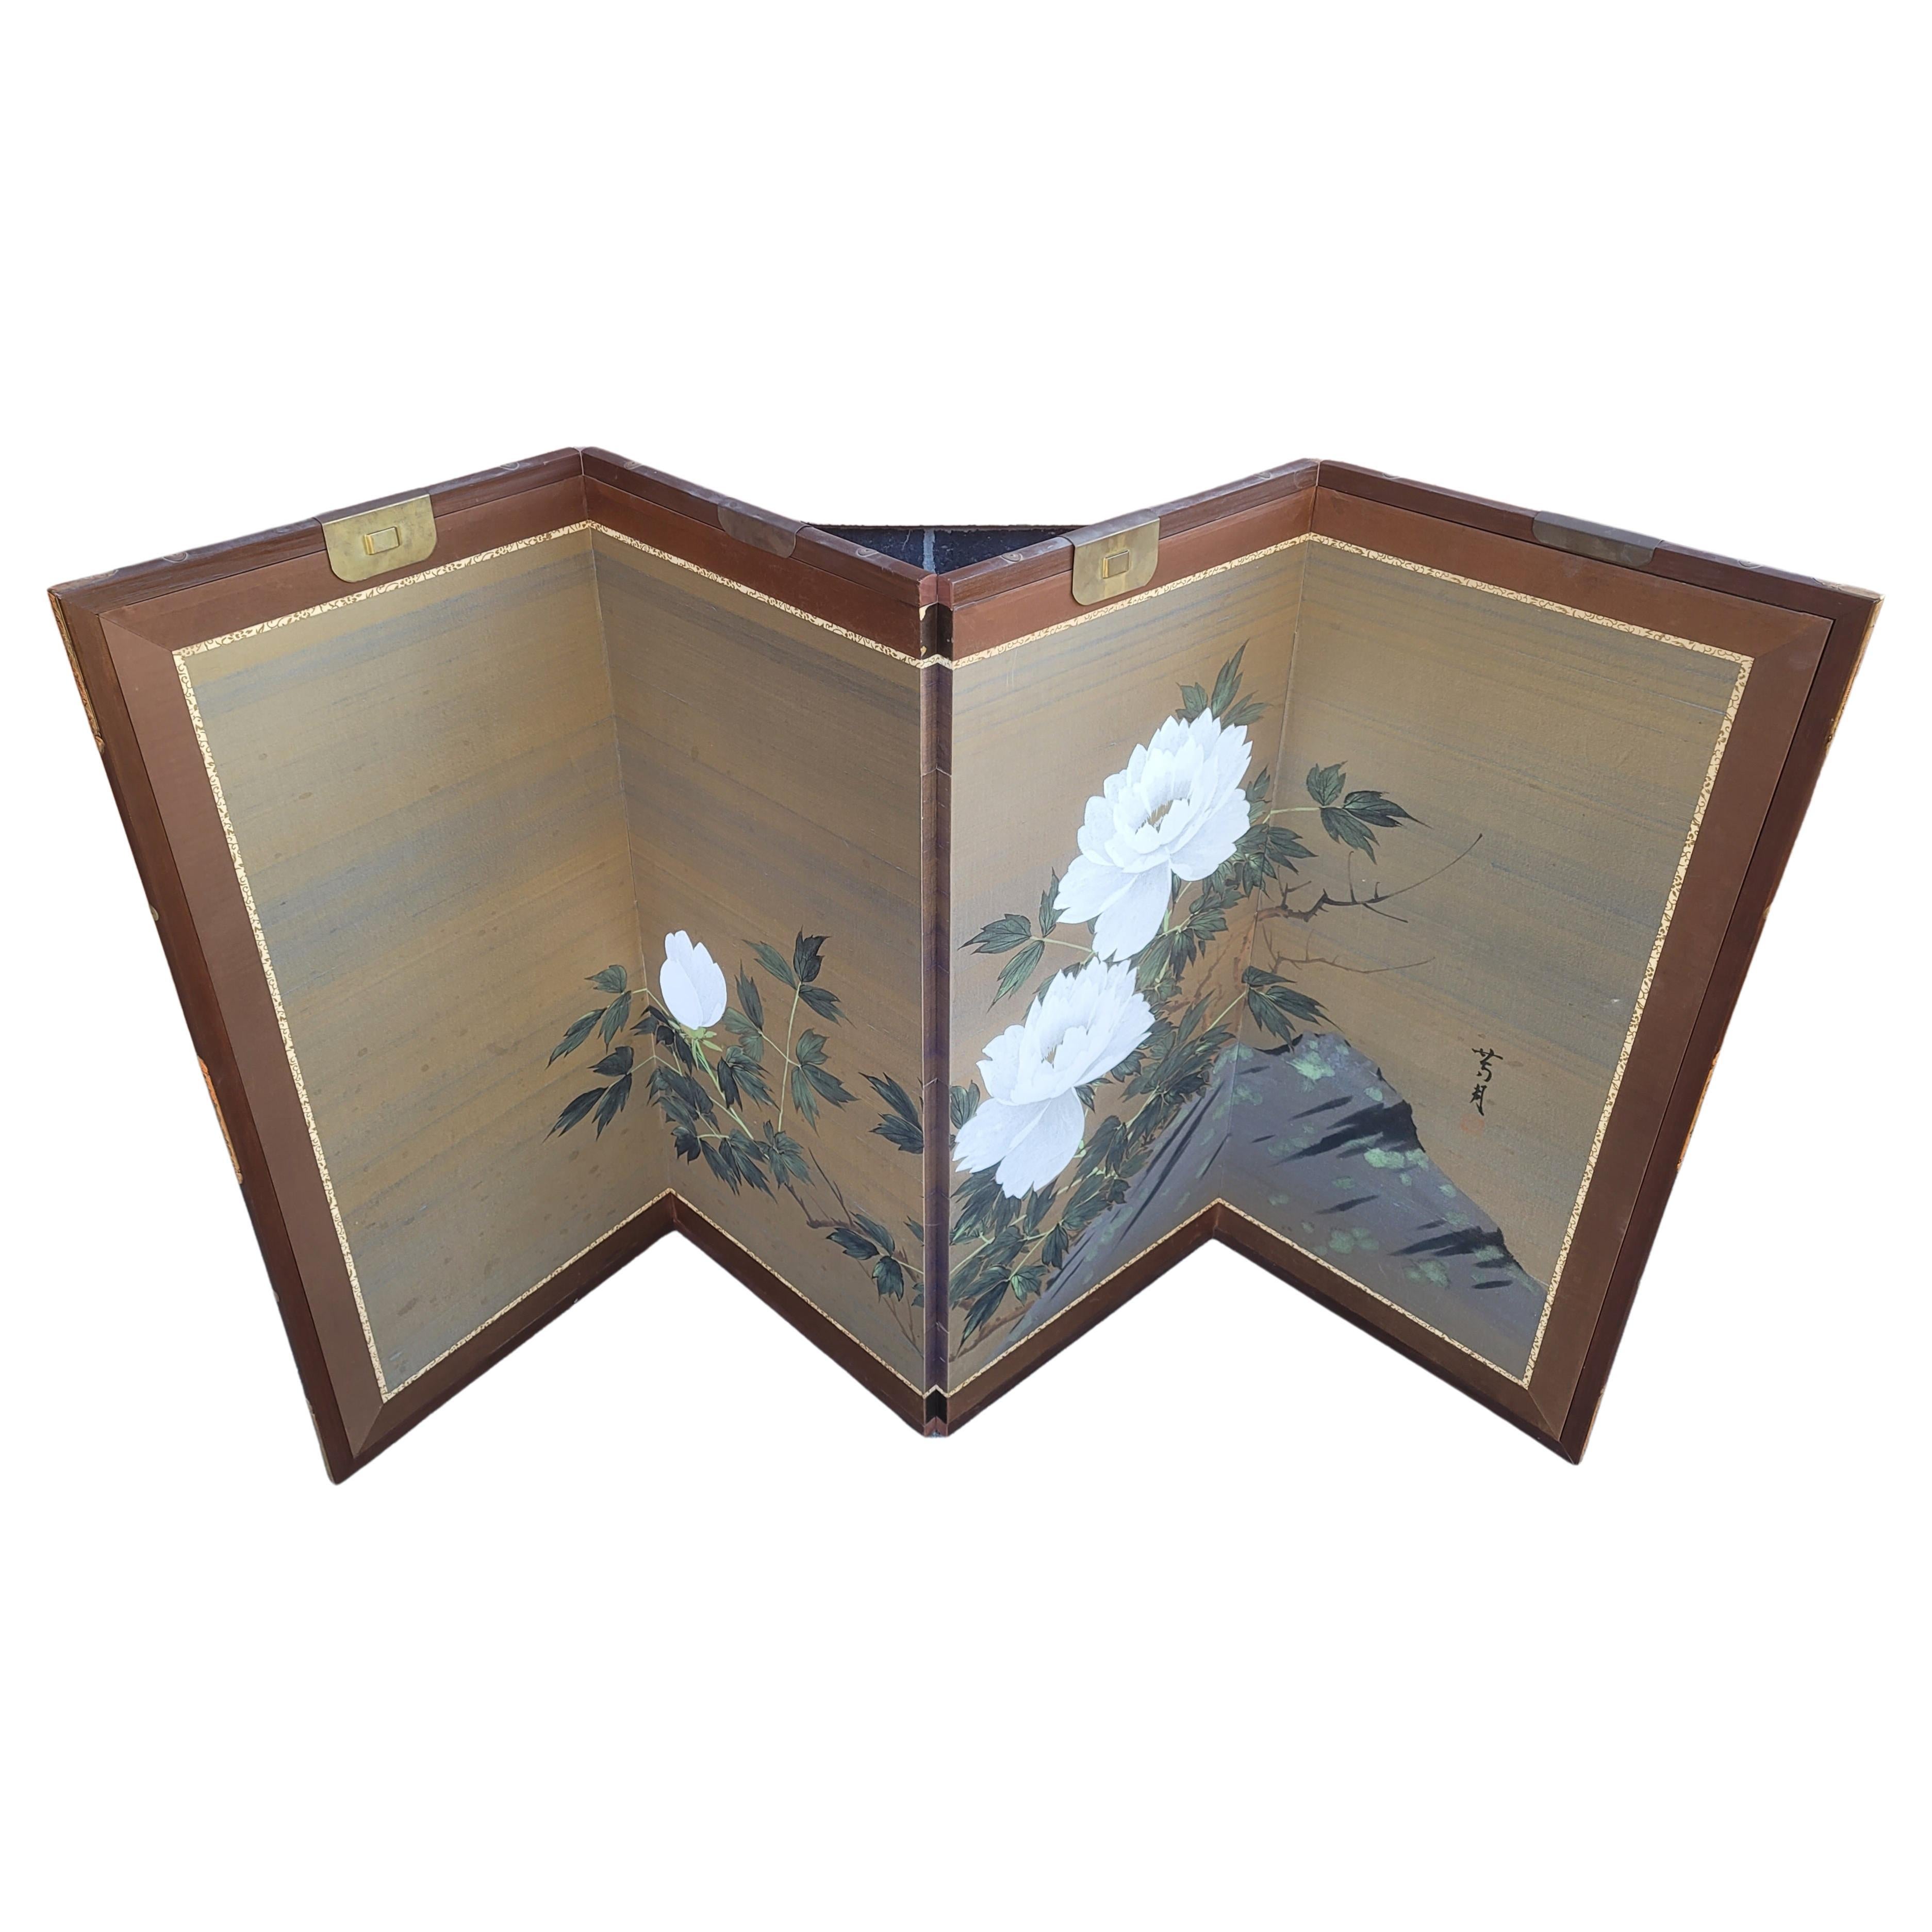 A 1950s Japanese Asian four-panel Byobu Showa folding screen of flowering lotus in good vintage condition.